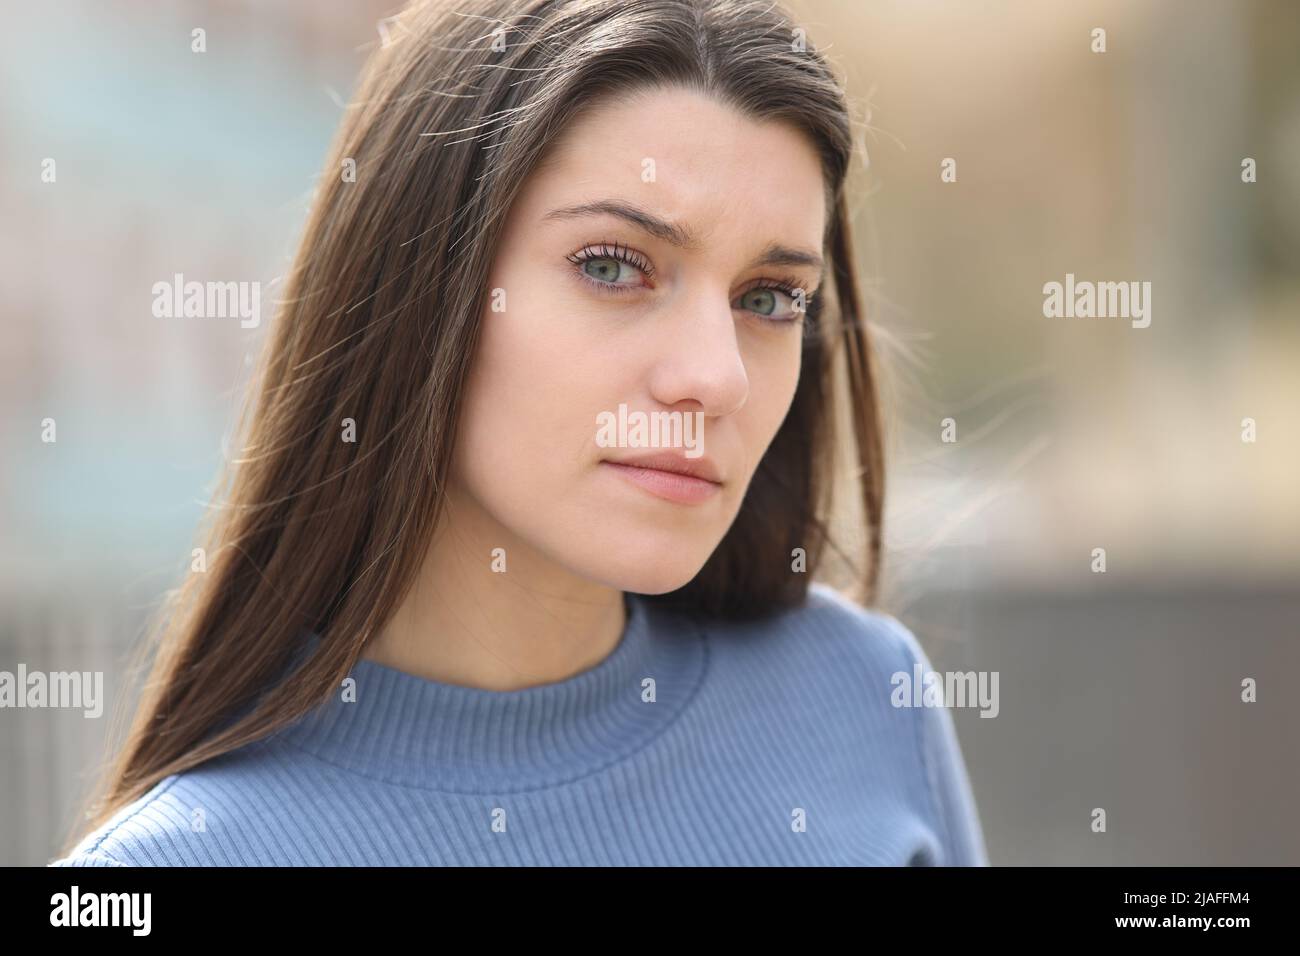 Portrait of an angry and suspicious woman looking at camera in the street Stock Photo